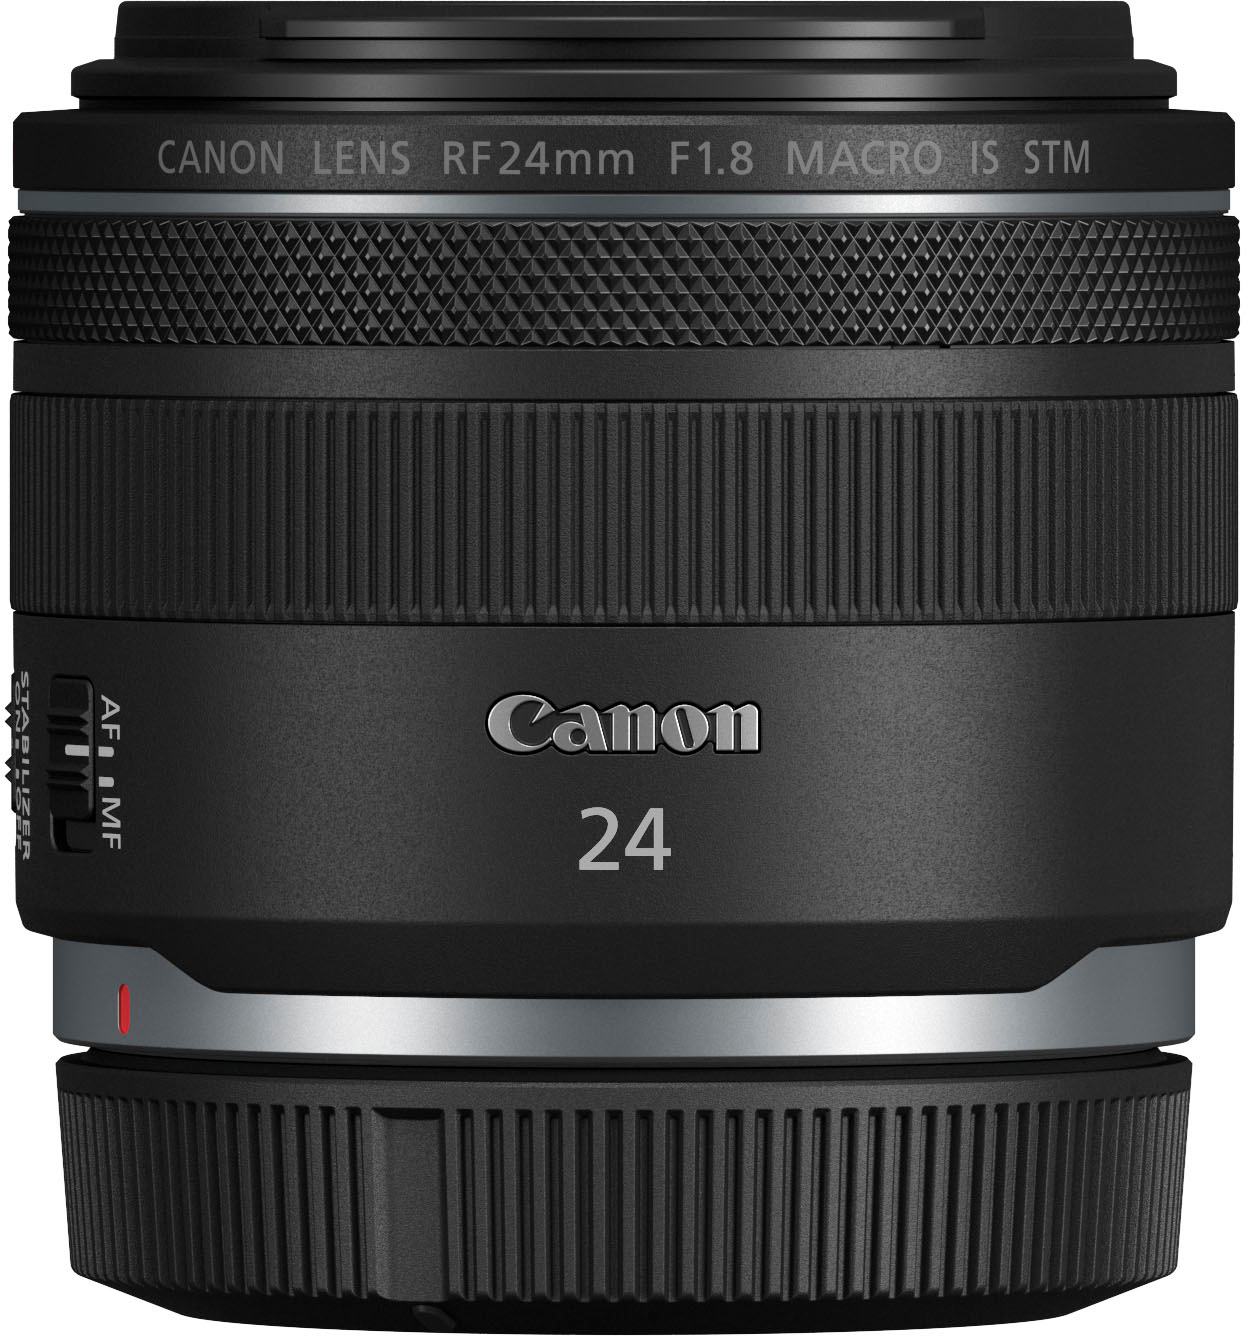 Angle View: Canon - RF 24mm f/1.8 MACRO IS STM Wide Angle Prime Lens - Black